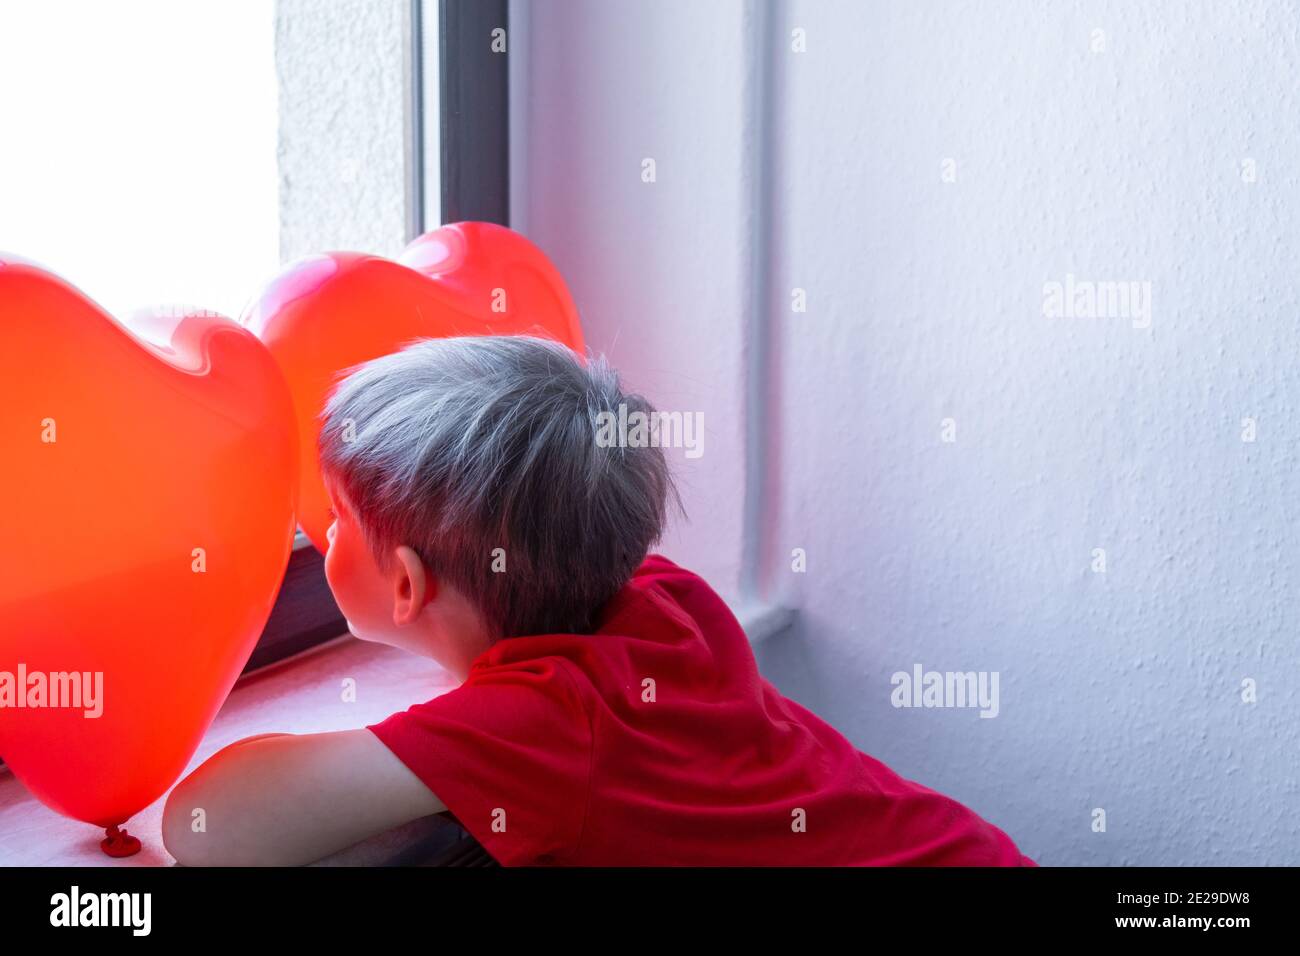 little boy with blond hair with red balloons, valentine's day Stock Photo